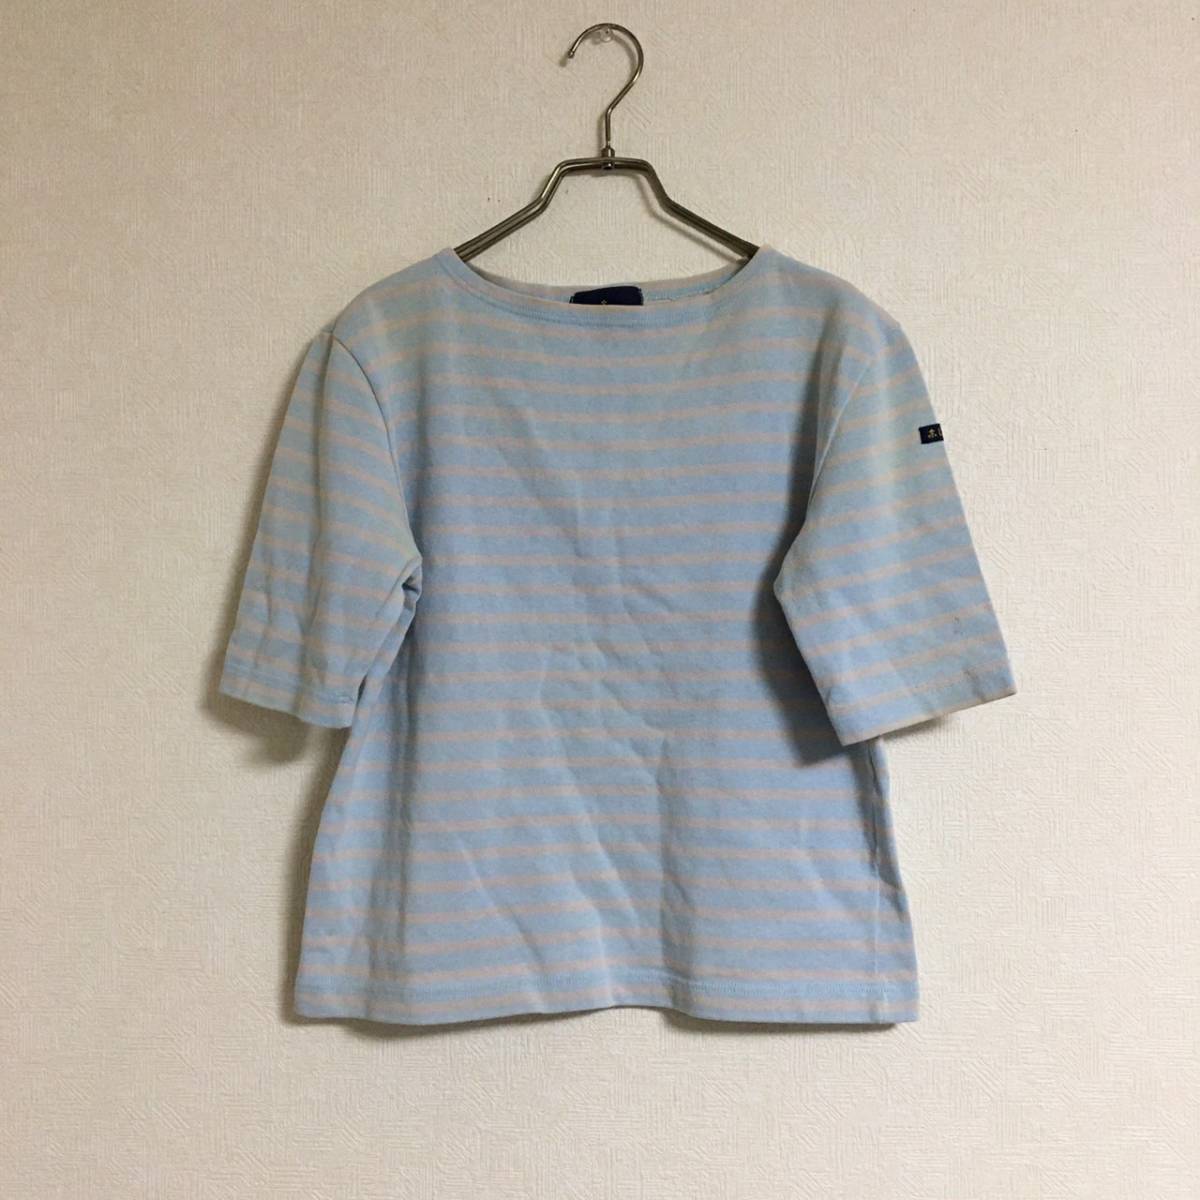  Le Minor Leminor for JOURNAL STANDARD bus k shirt T-shirt cut and sewn boat neck border M size 